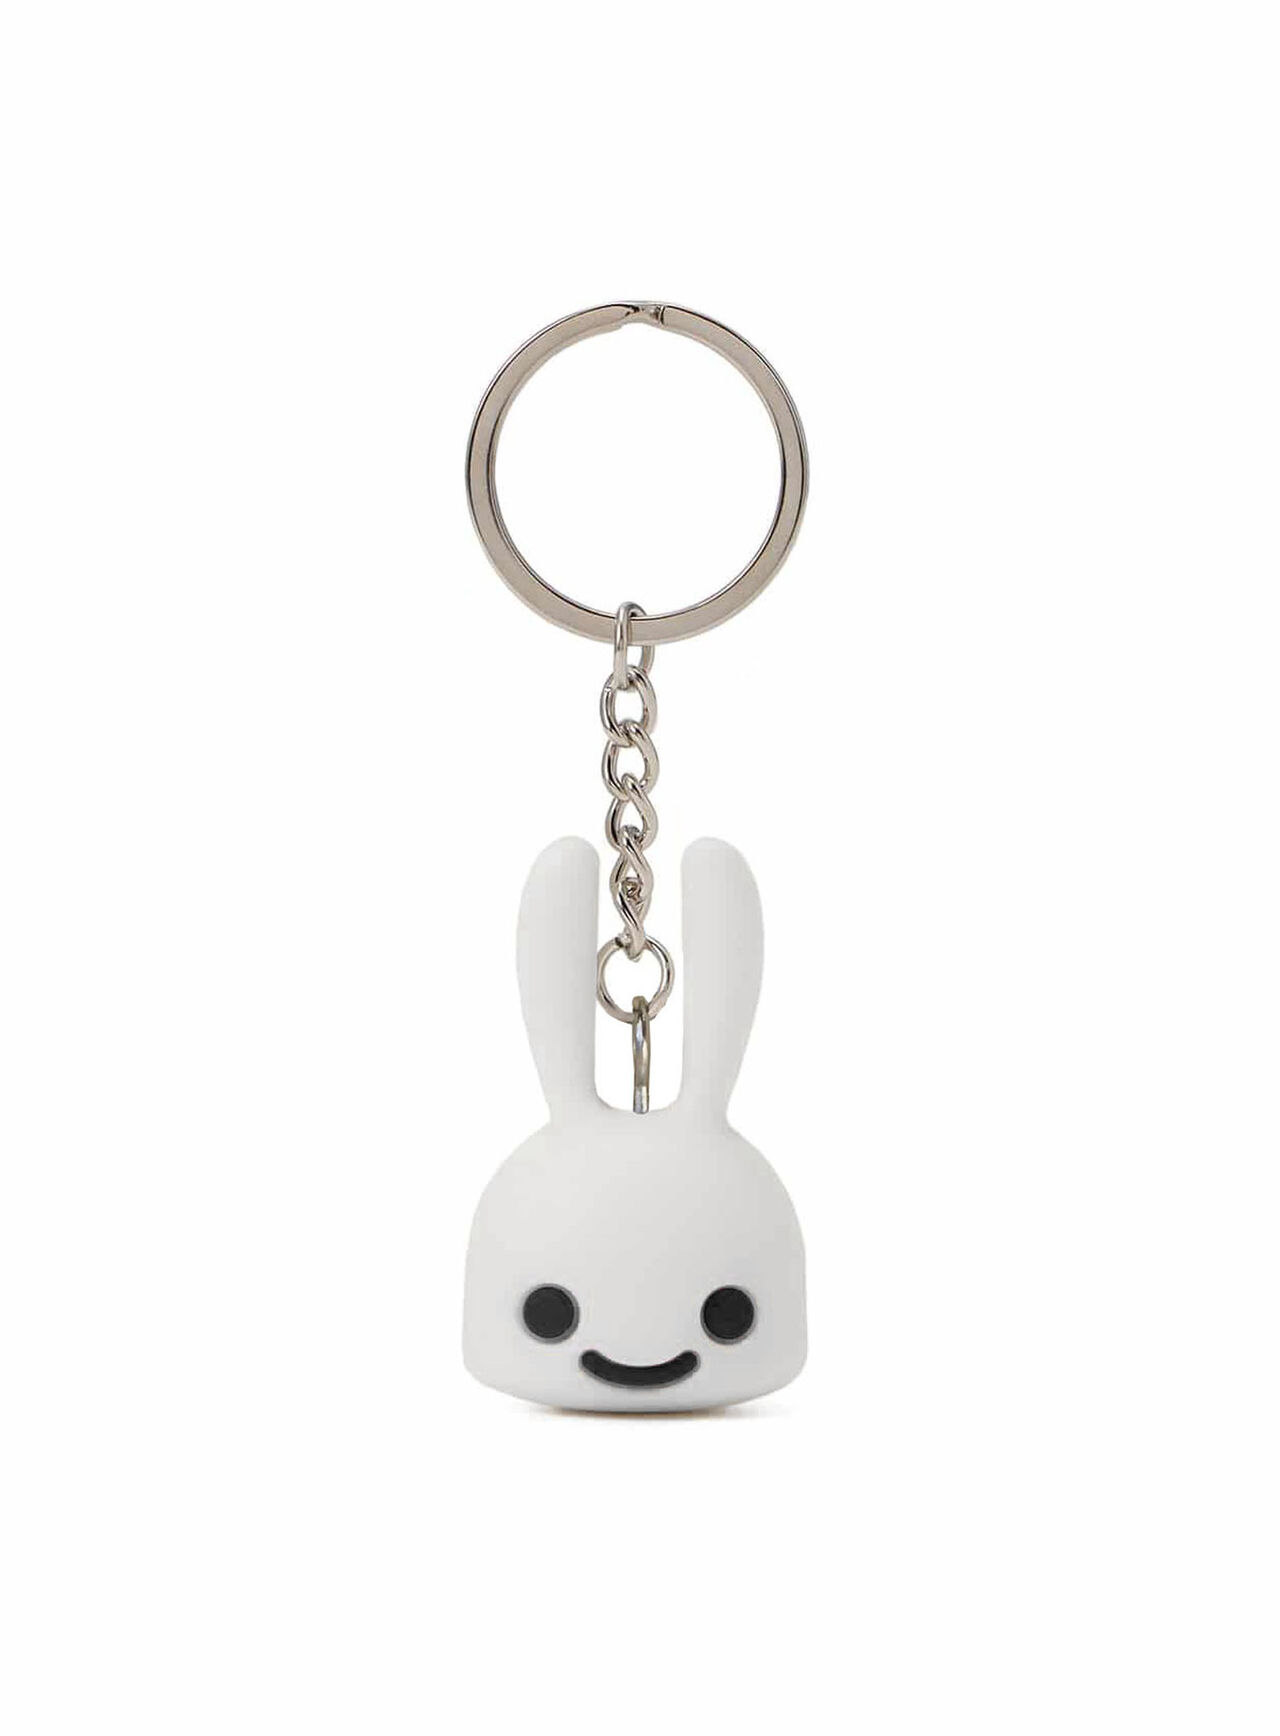 3D Rabbit Rubber Key Chain,ONE, large image number 0